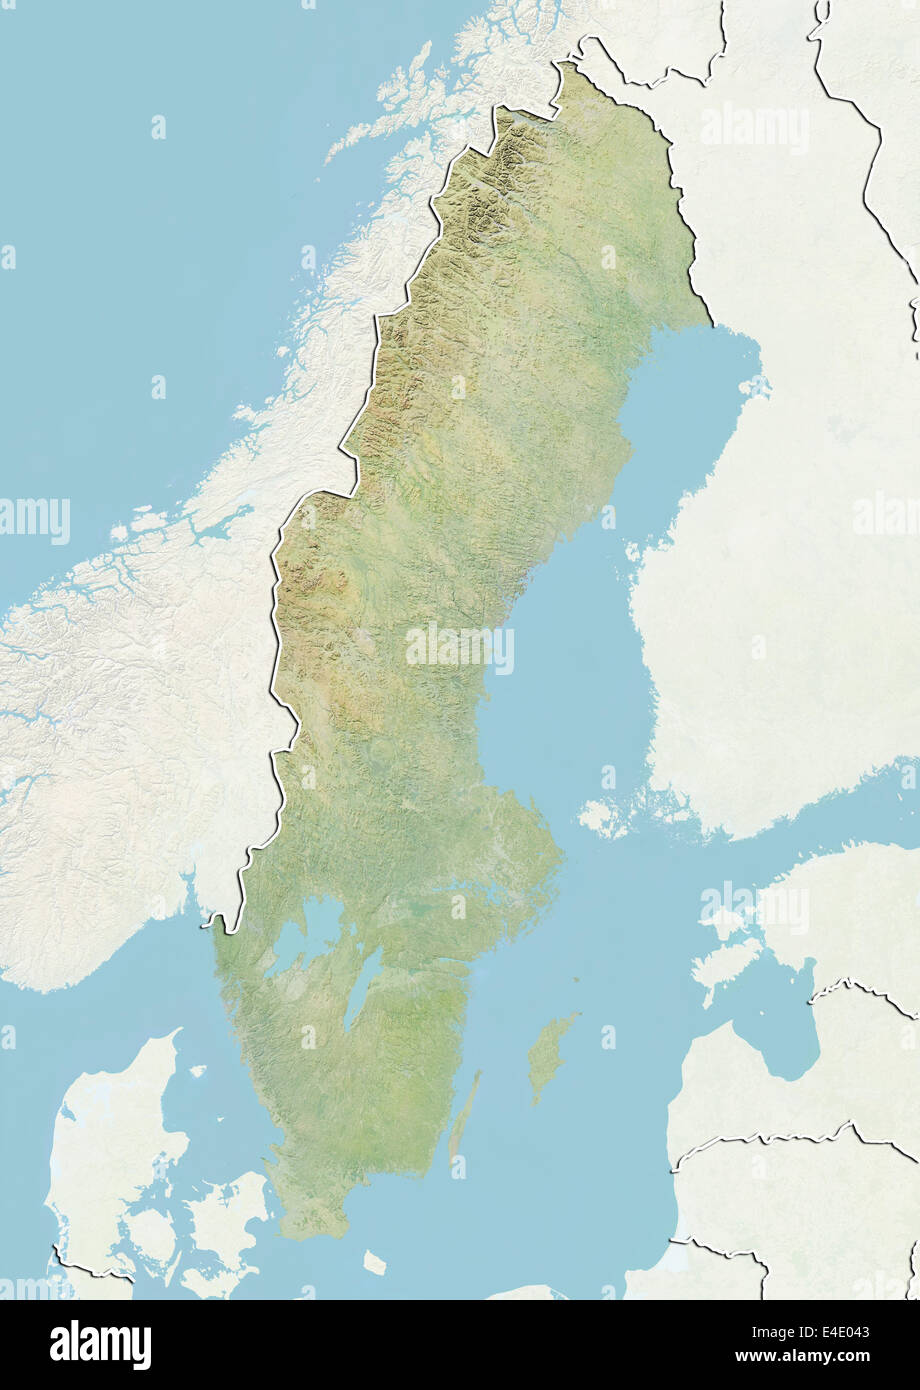 Sweden, Relief Map with Border and Mask Stock Photo